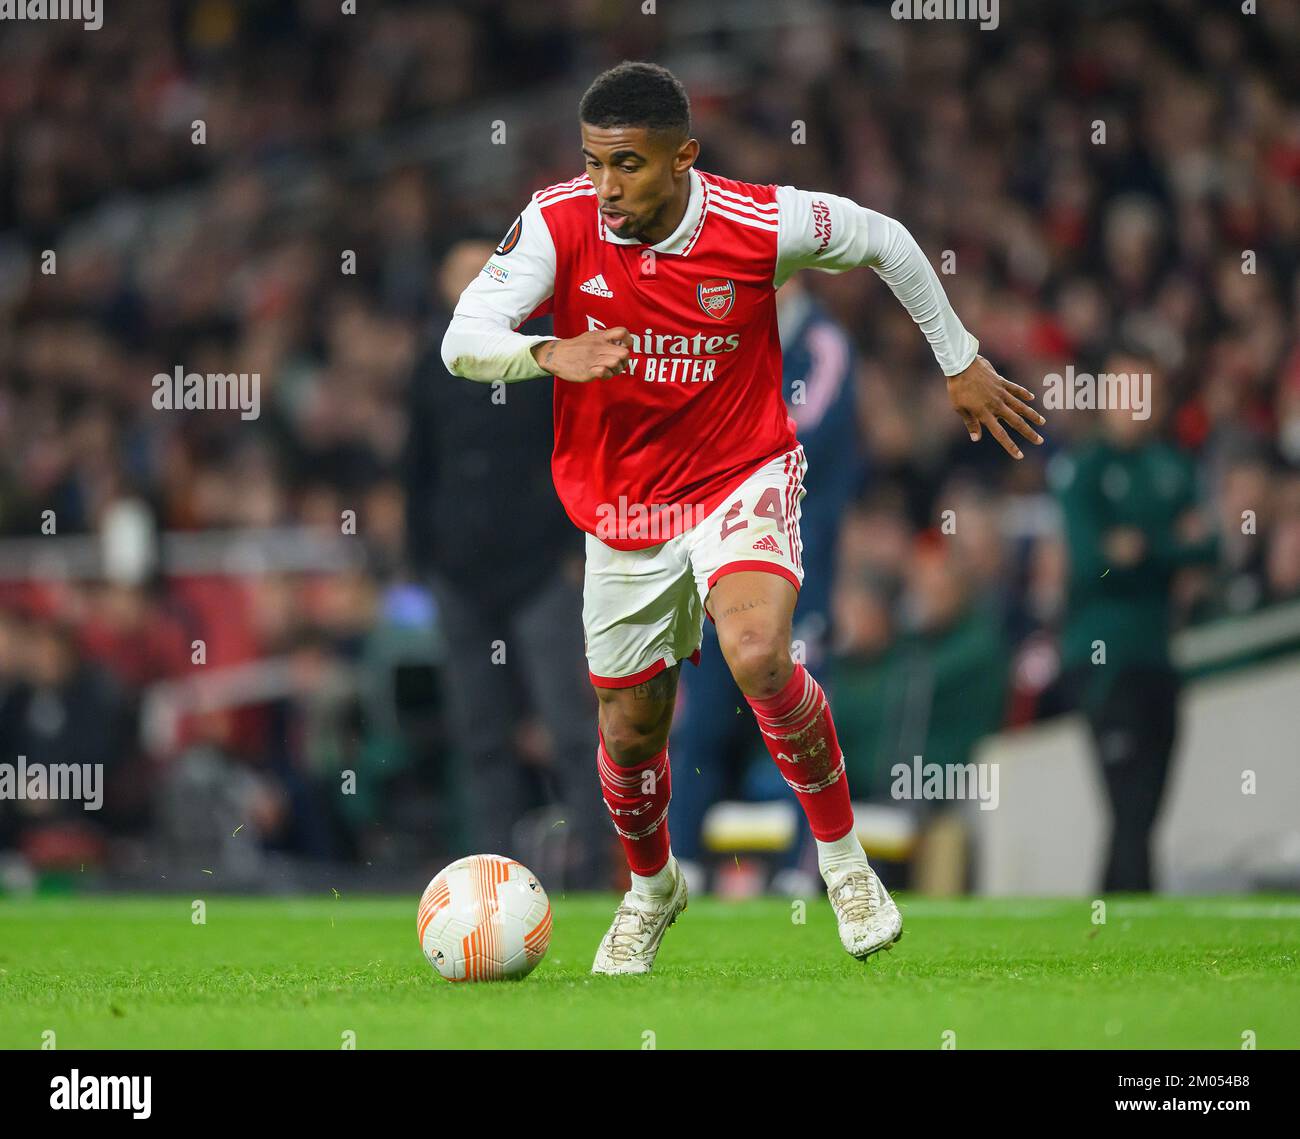 03 Nov 2022 - Arsenal v FC Zurich - UEFA Europa League - Group A - Emirates Stadium   Arsenal's Reiss Nelson during the match against FC Zurich Picture : Mark Pain / Alamy Stock Photo